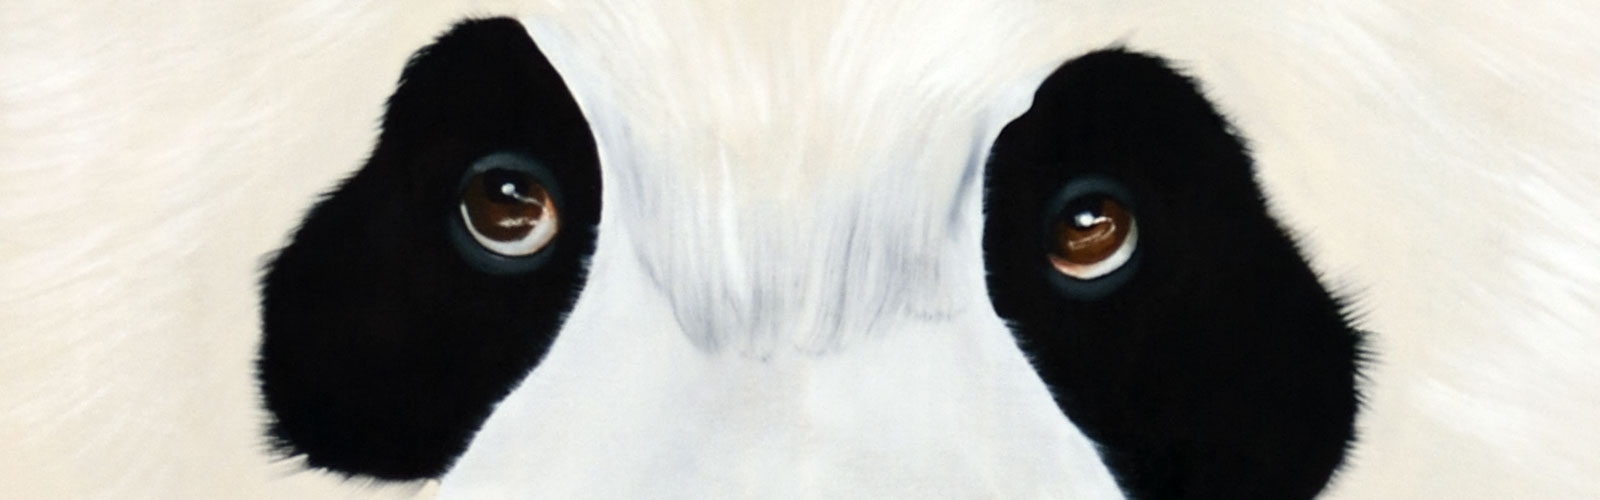 Closeup-Panda animal-painting Thierry Bisch Contemporary painter animals painting art  nature biodiversity conservation